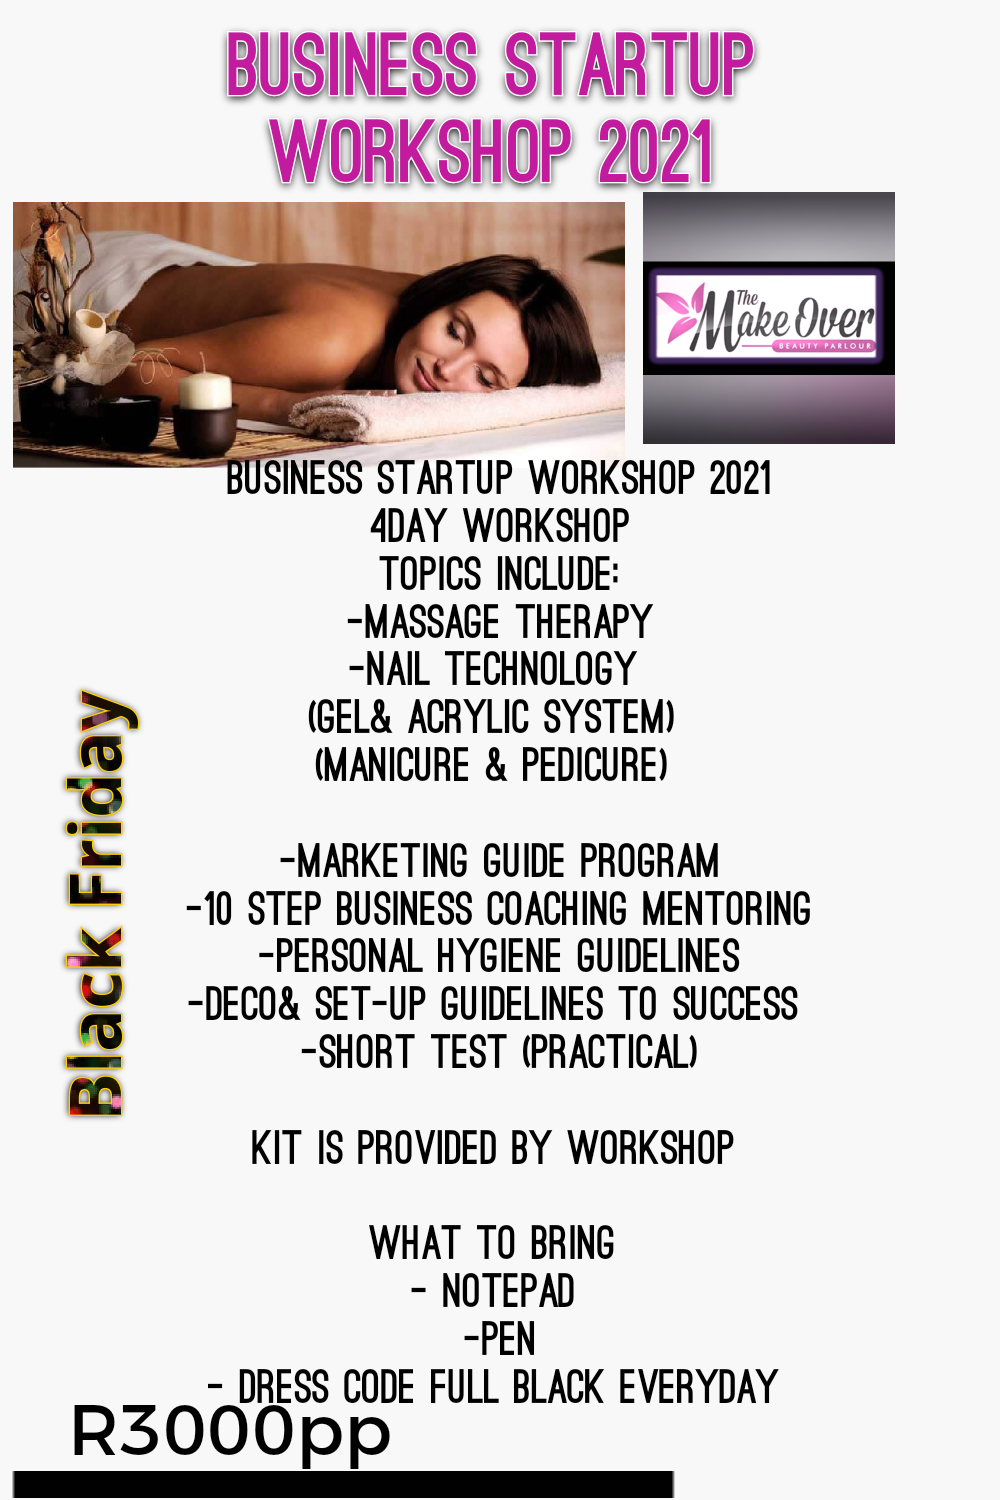 Combo deal R2000 for course/R3000 for business coaching and mentoring program all together all in one